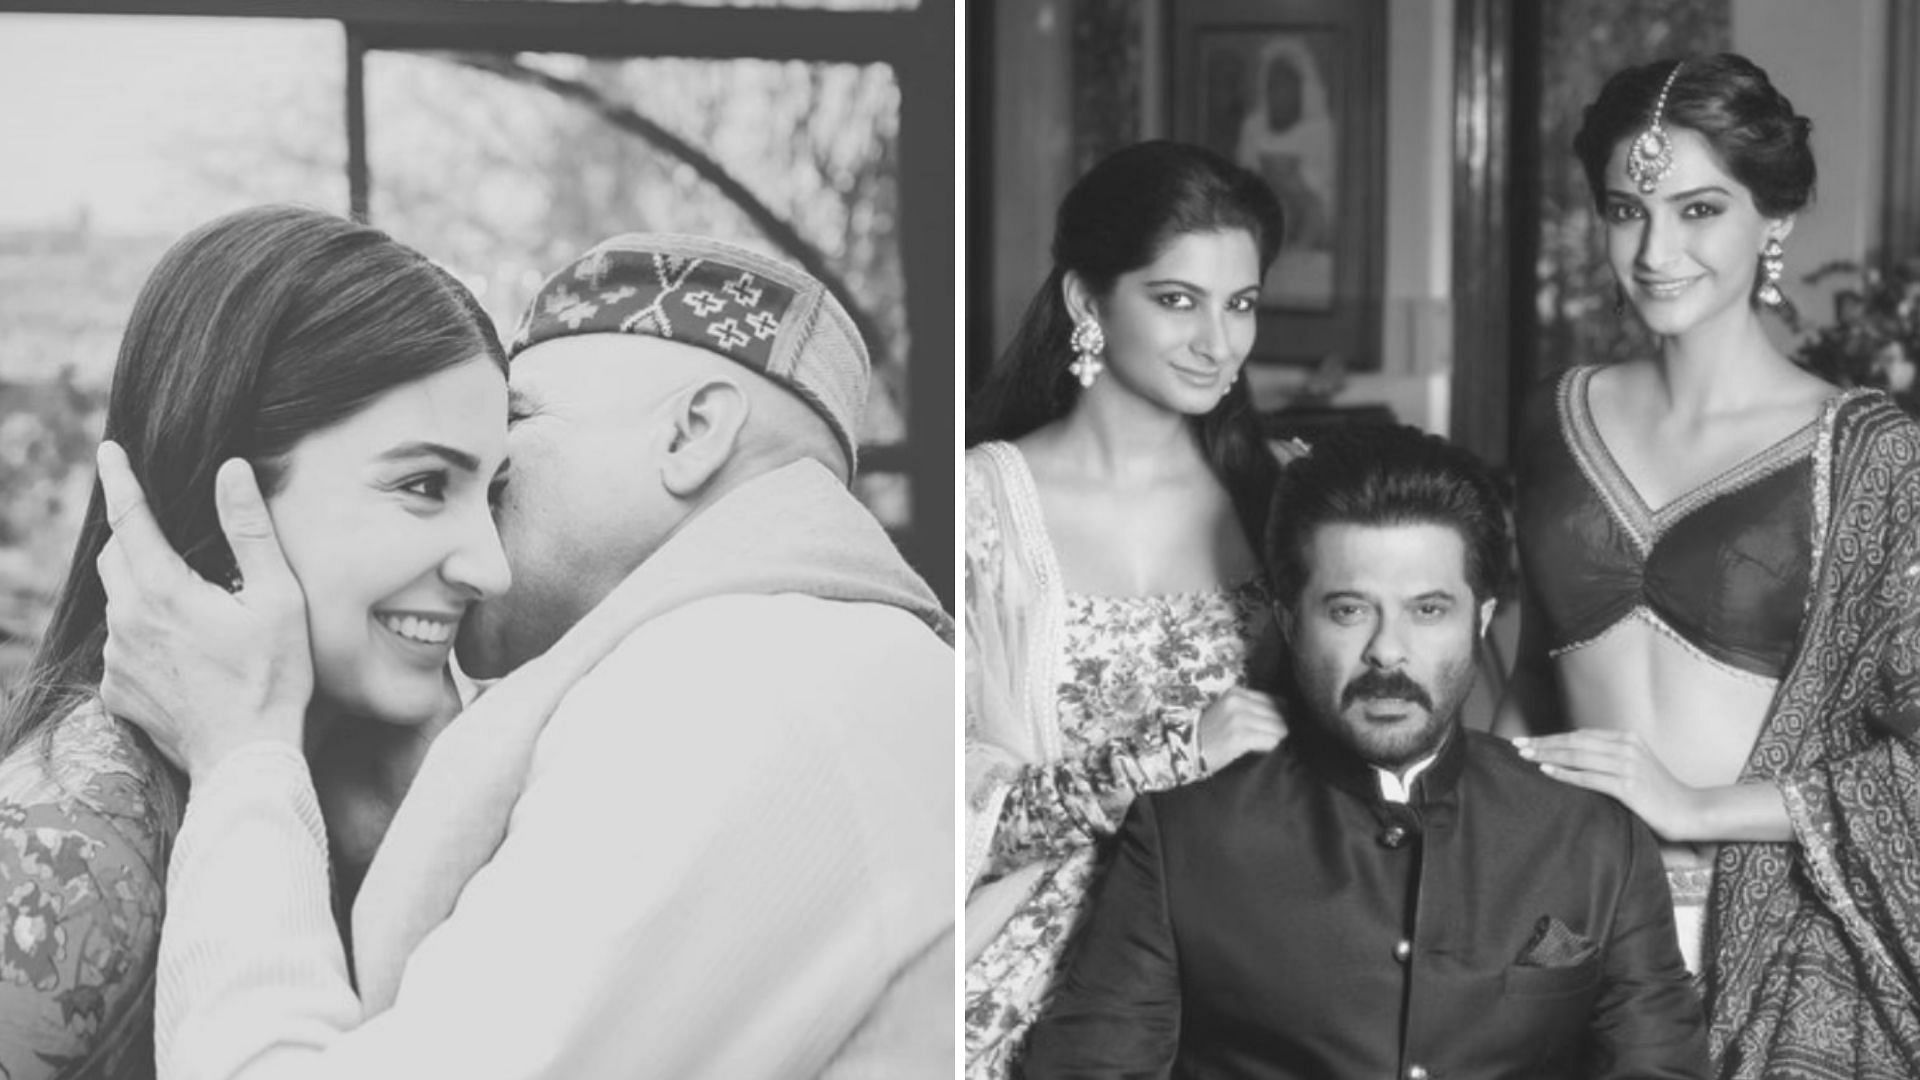 Happy Father’s Day 2020: Anushka Sharma, Sonam Kapoor Ahuja, Amitabh Bachchan, Madhuri Dixit and Vidya Balan share memories from the past with their fathers.